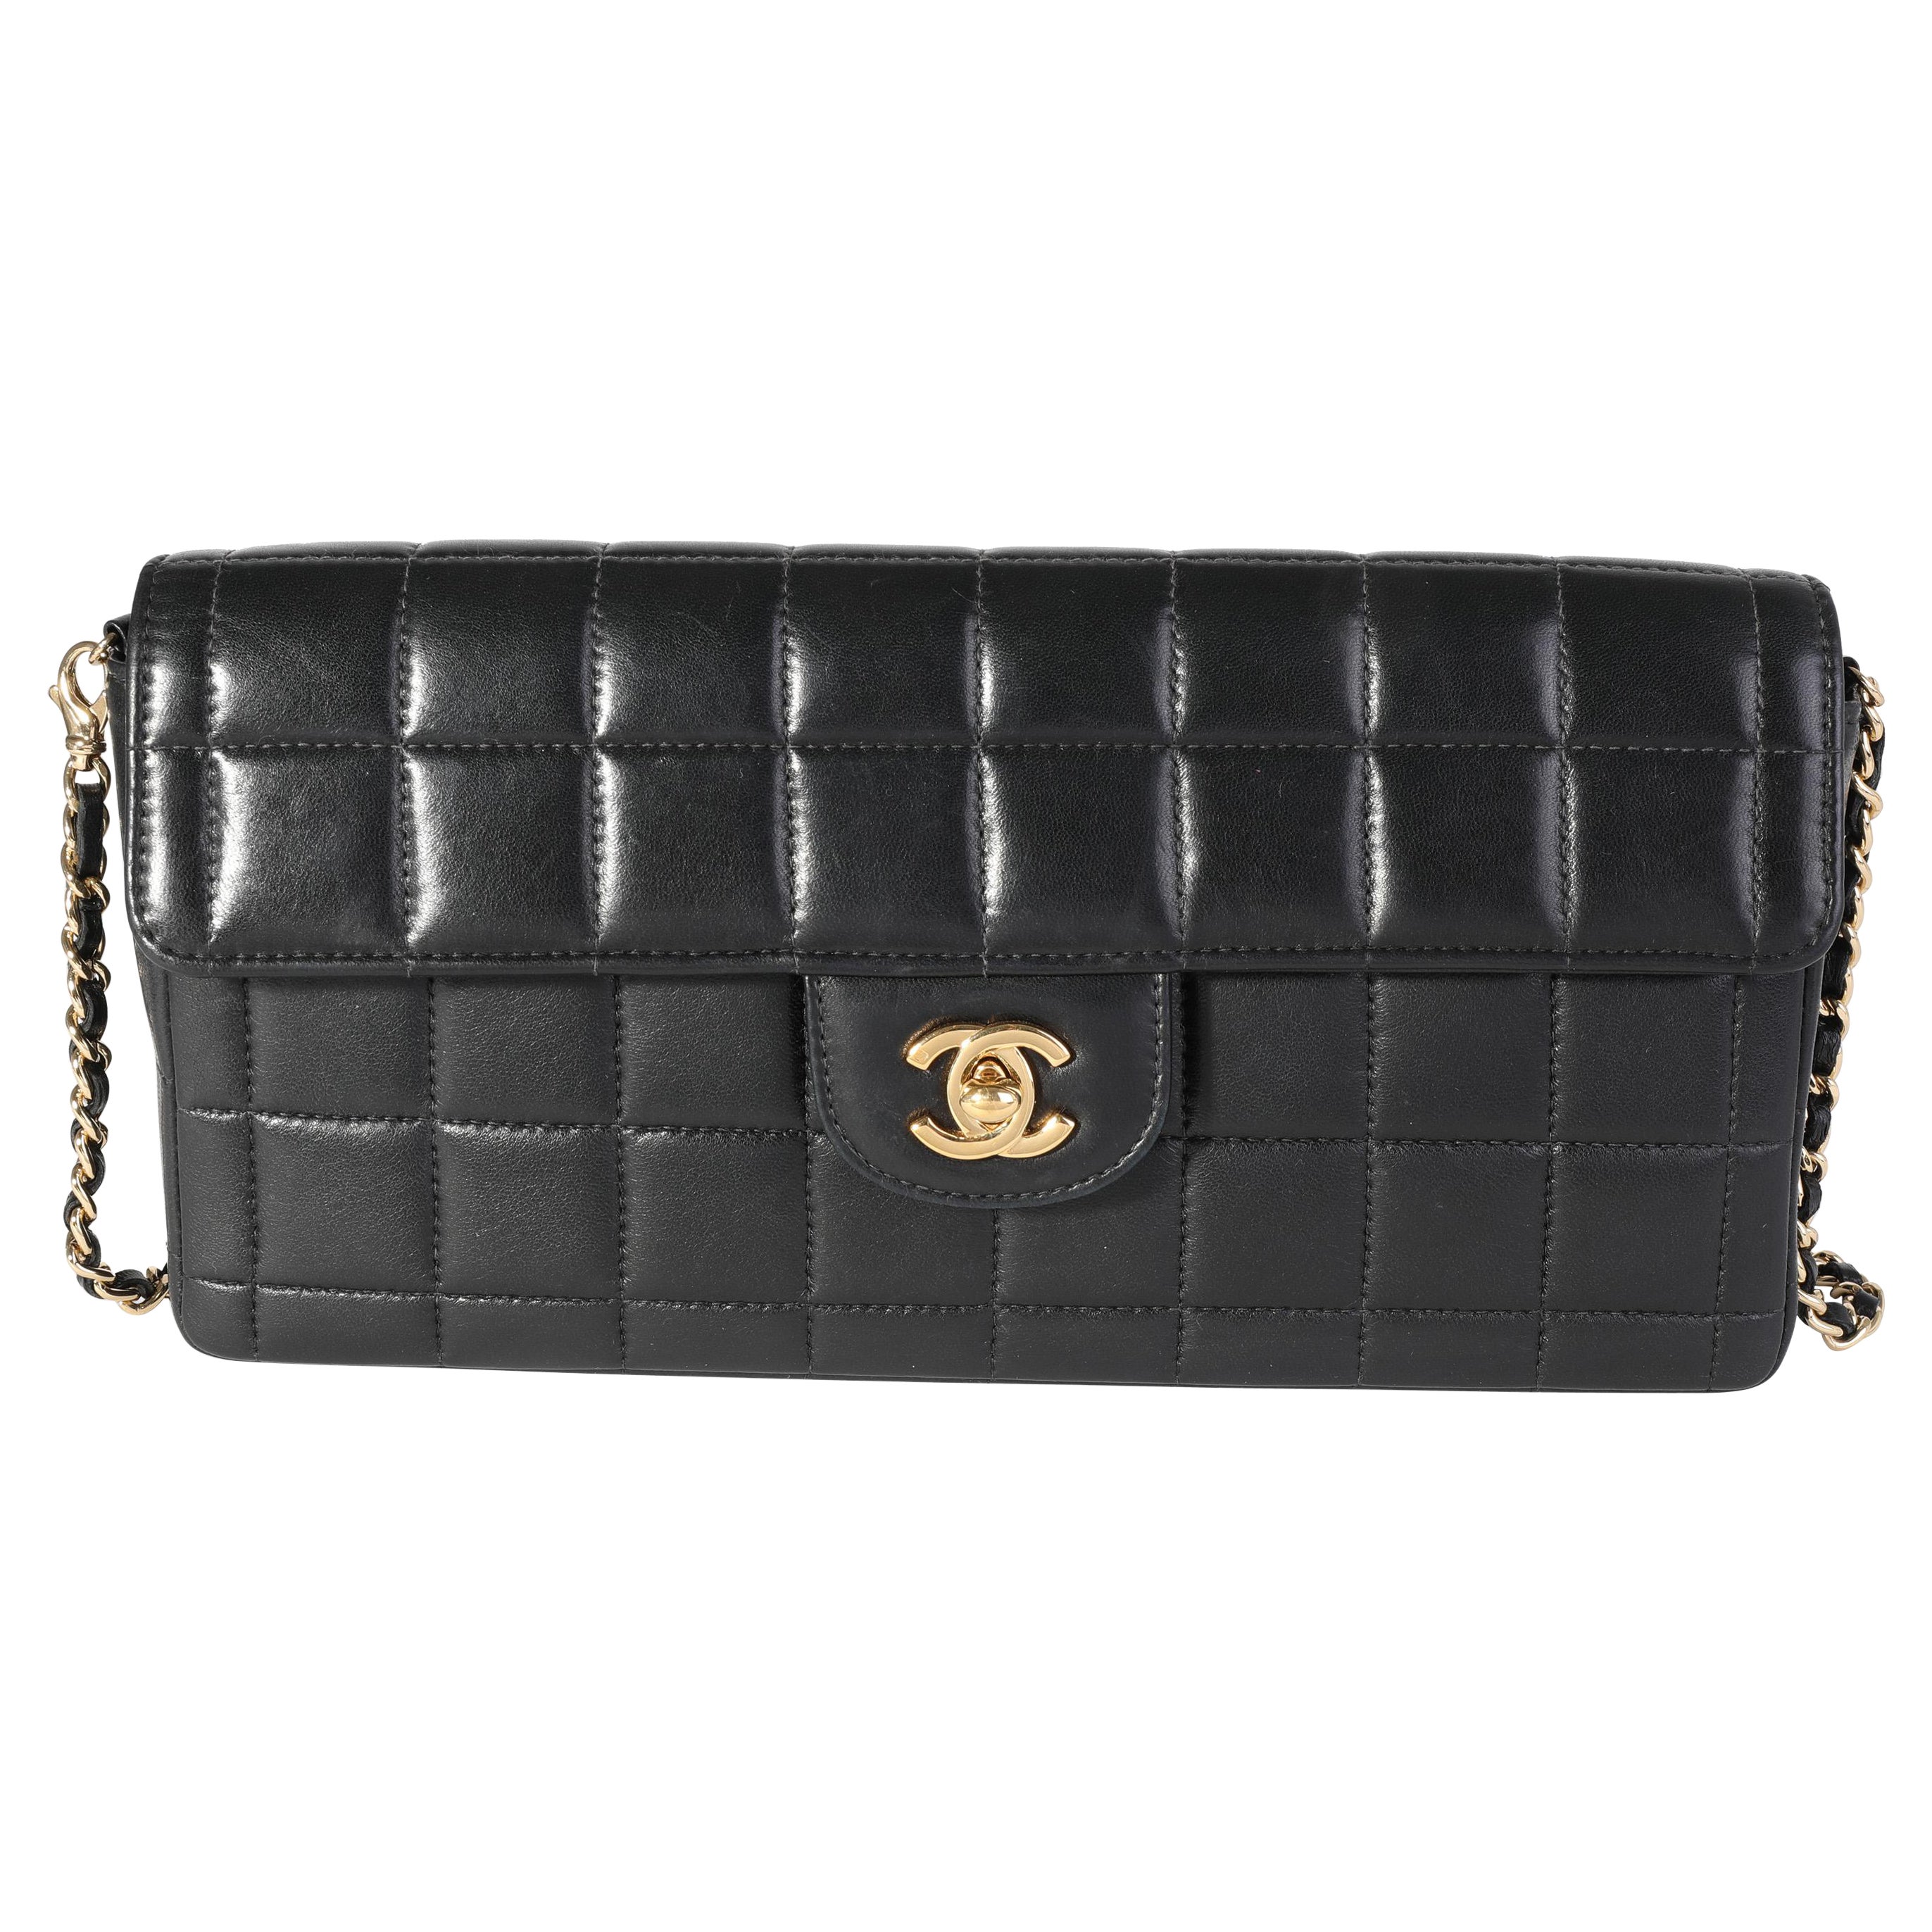 Chanel Black Lambskin Chocolate Bar Quilted East West Flap Bag